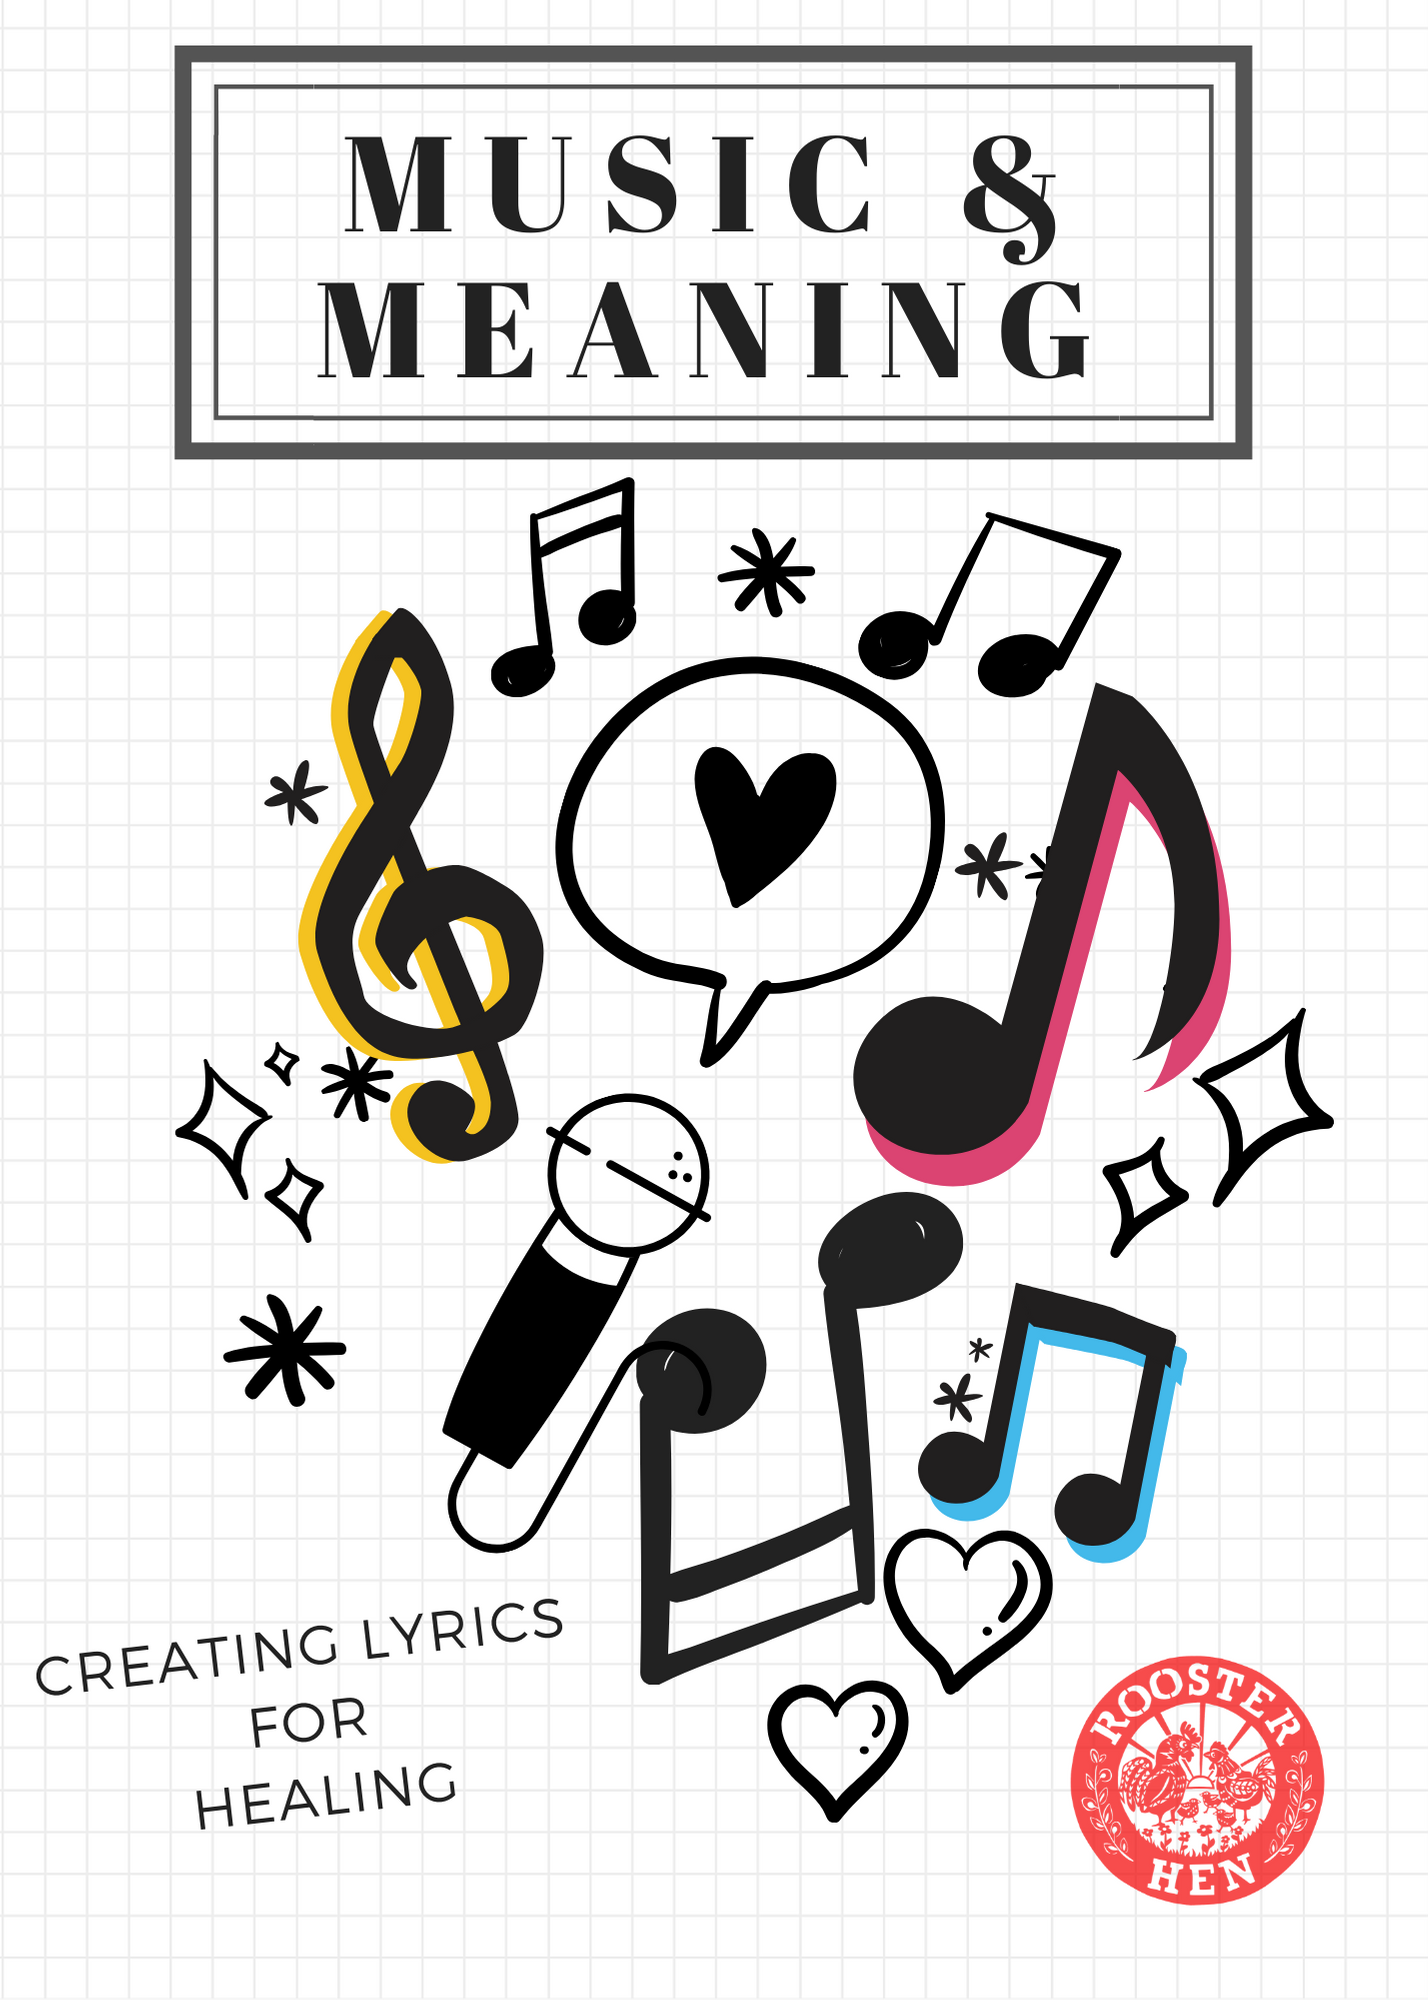 Music & Meaning